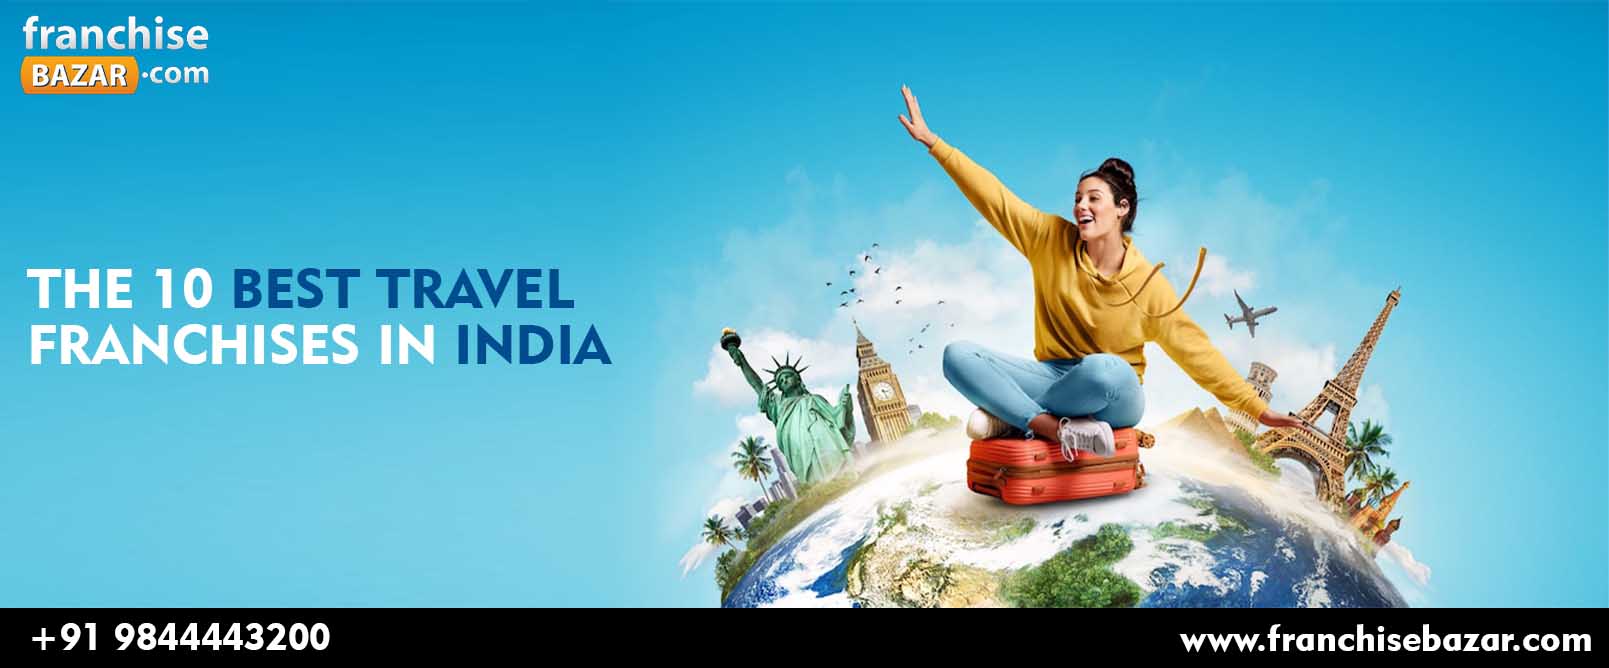 Find The 10 Best Travel Franchise Businesses in India in 2022